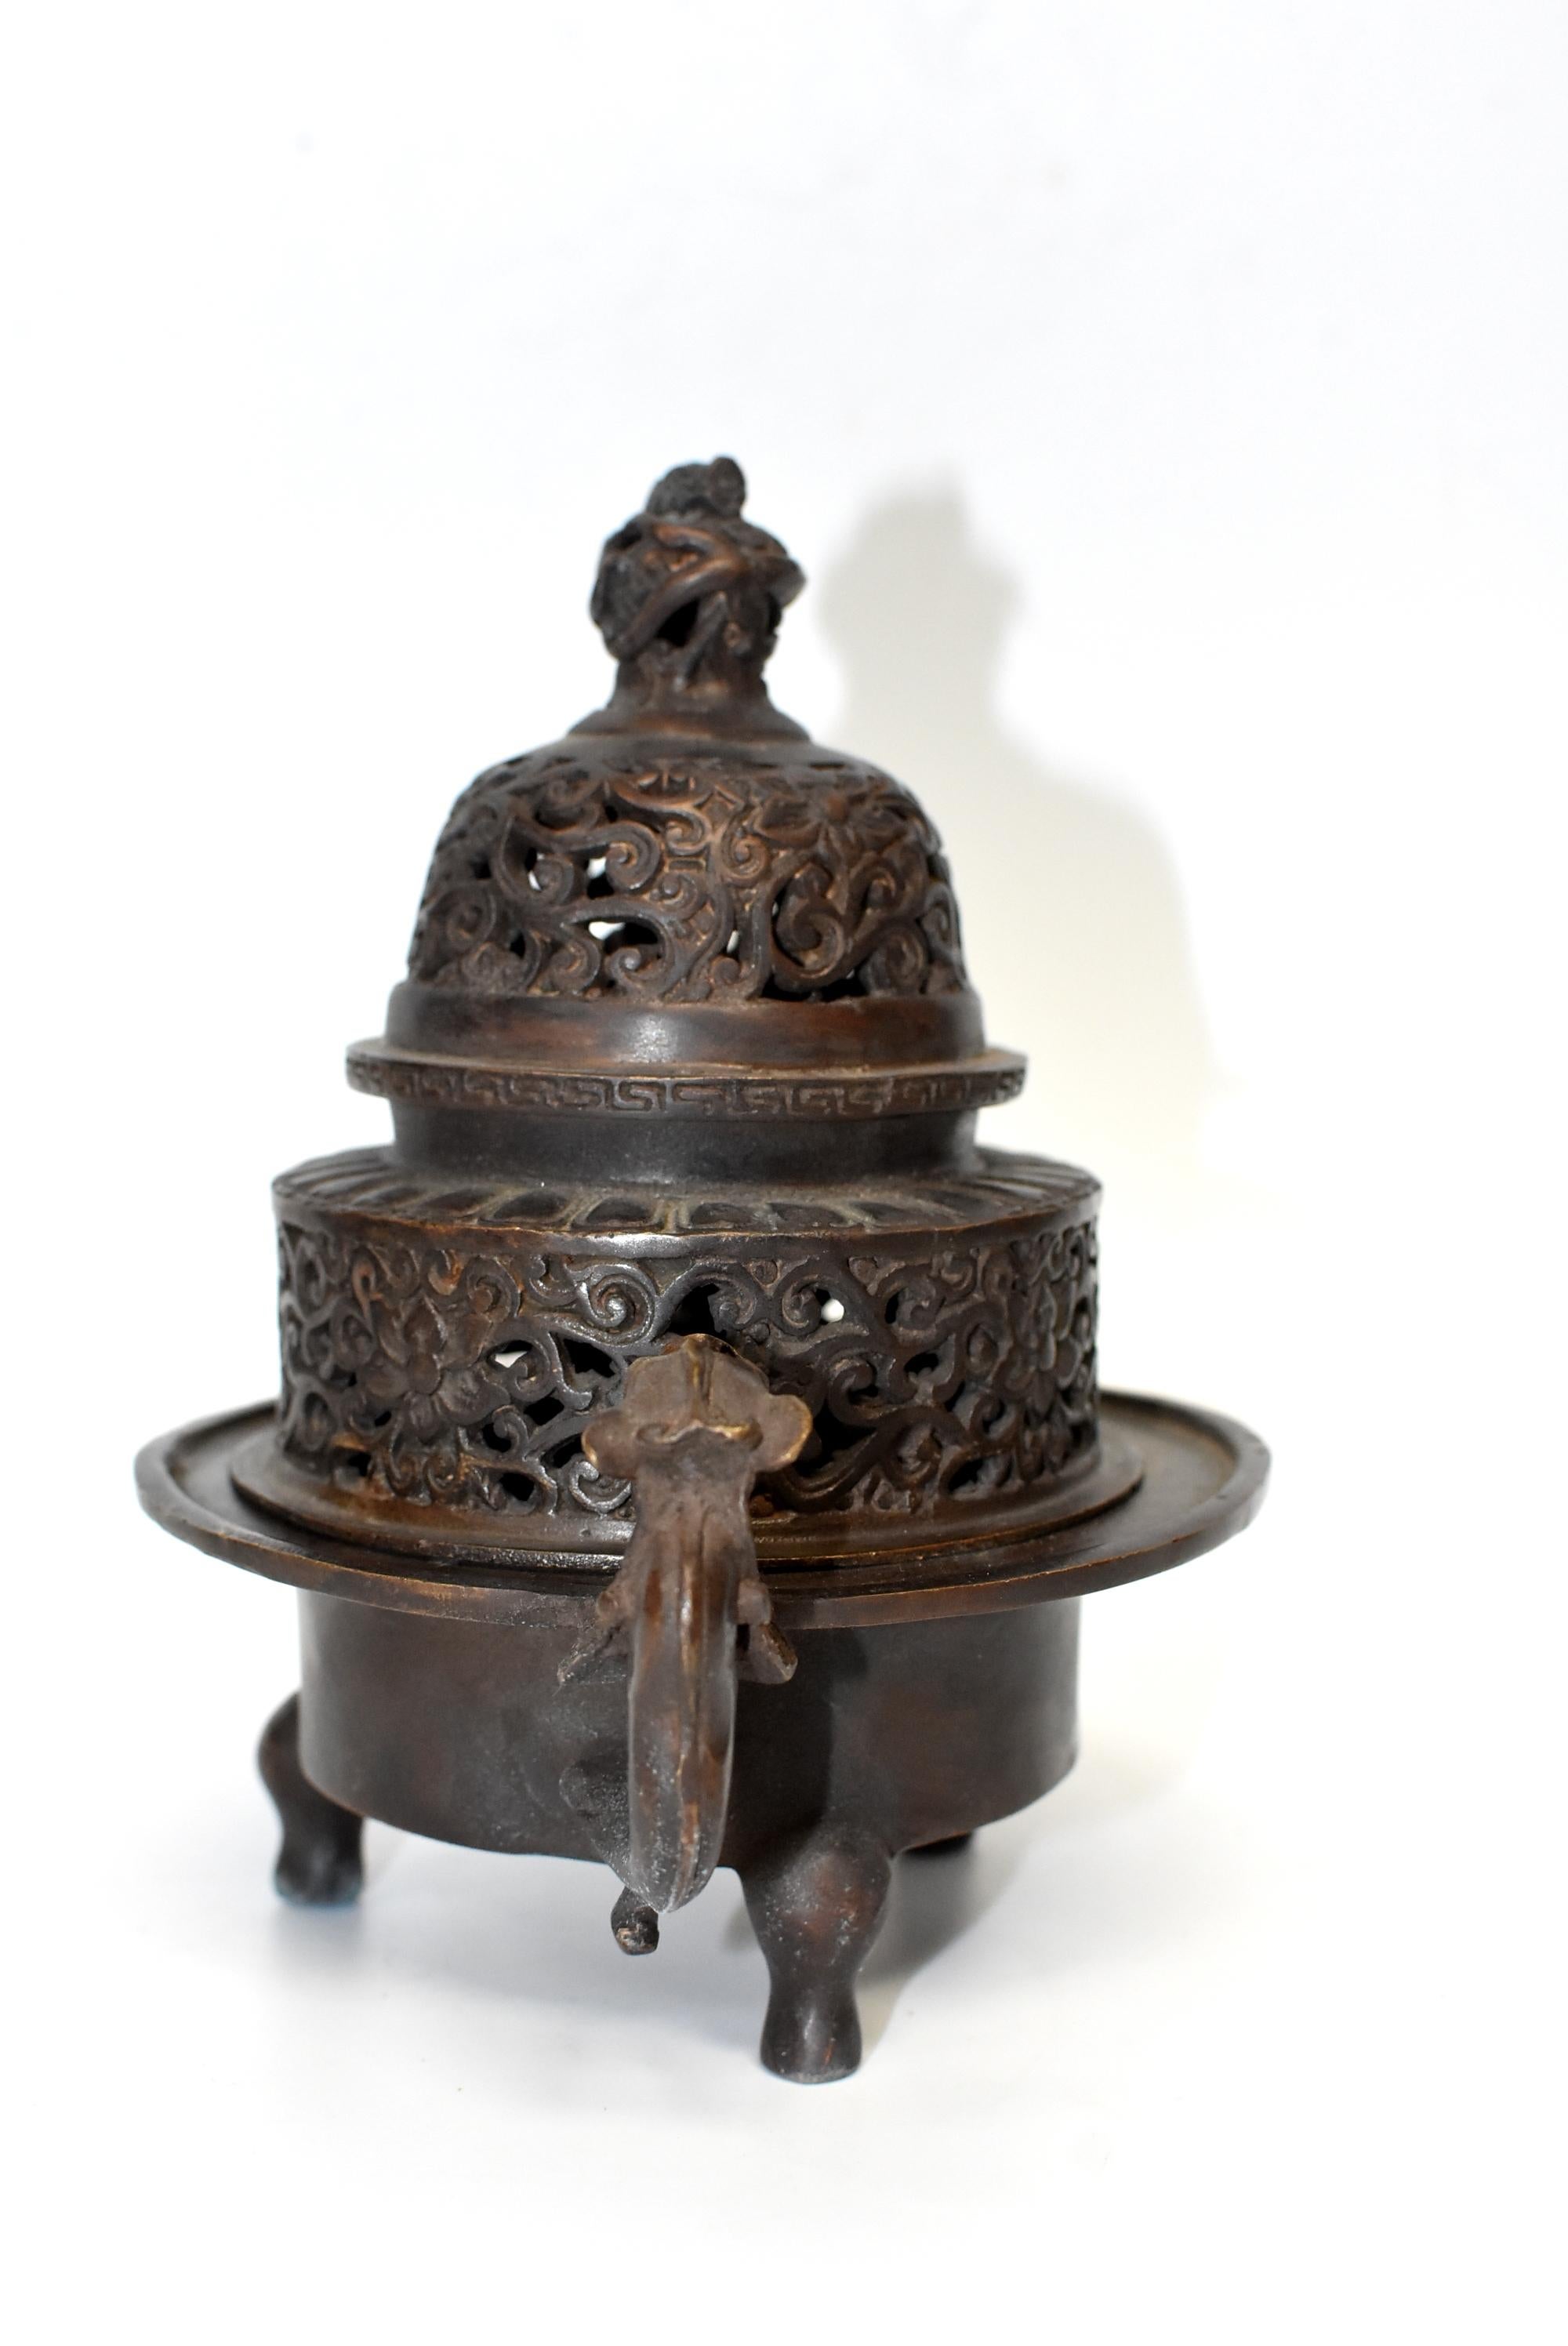 Qing Chinese Antique Incense Burner, Copper Bronze with Dragons, Signed